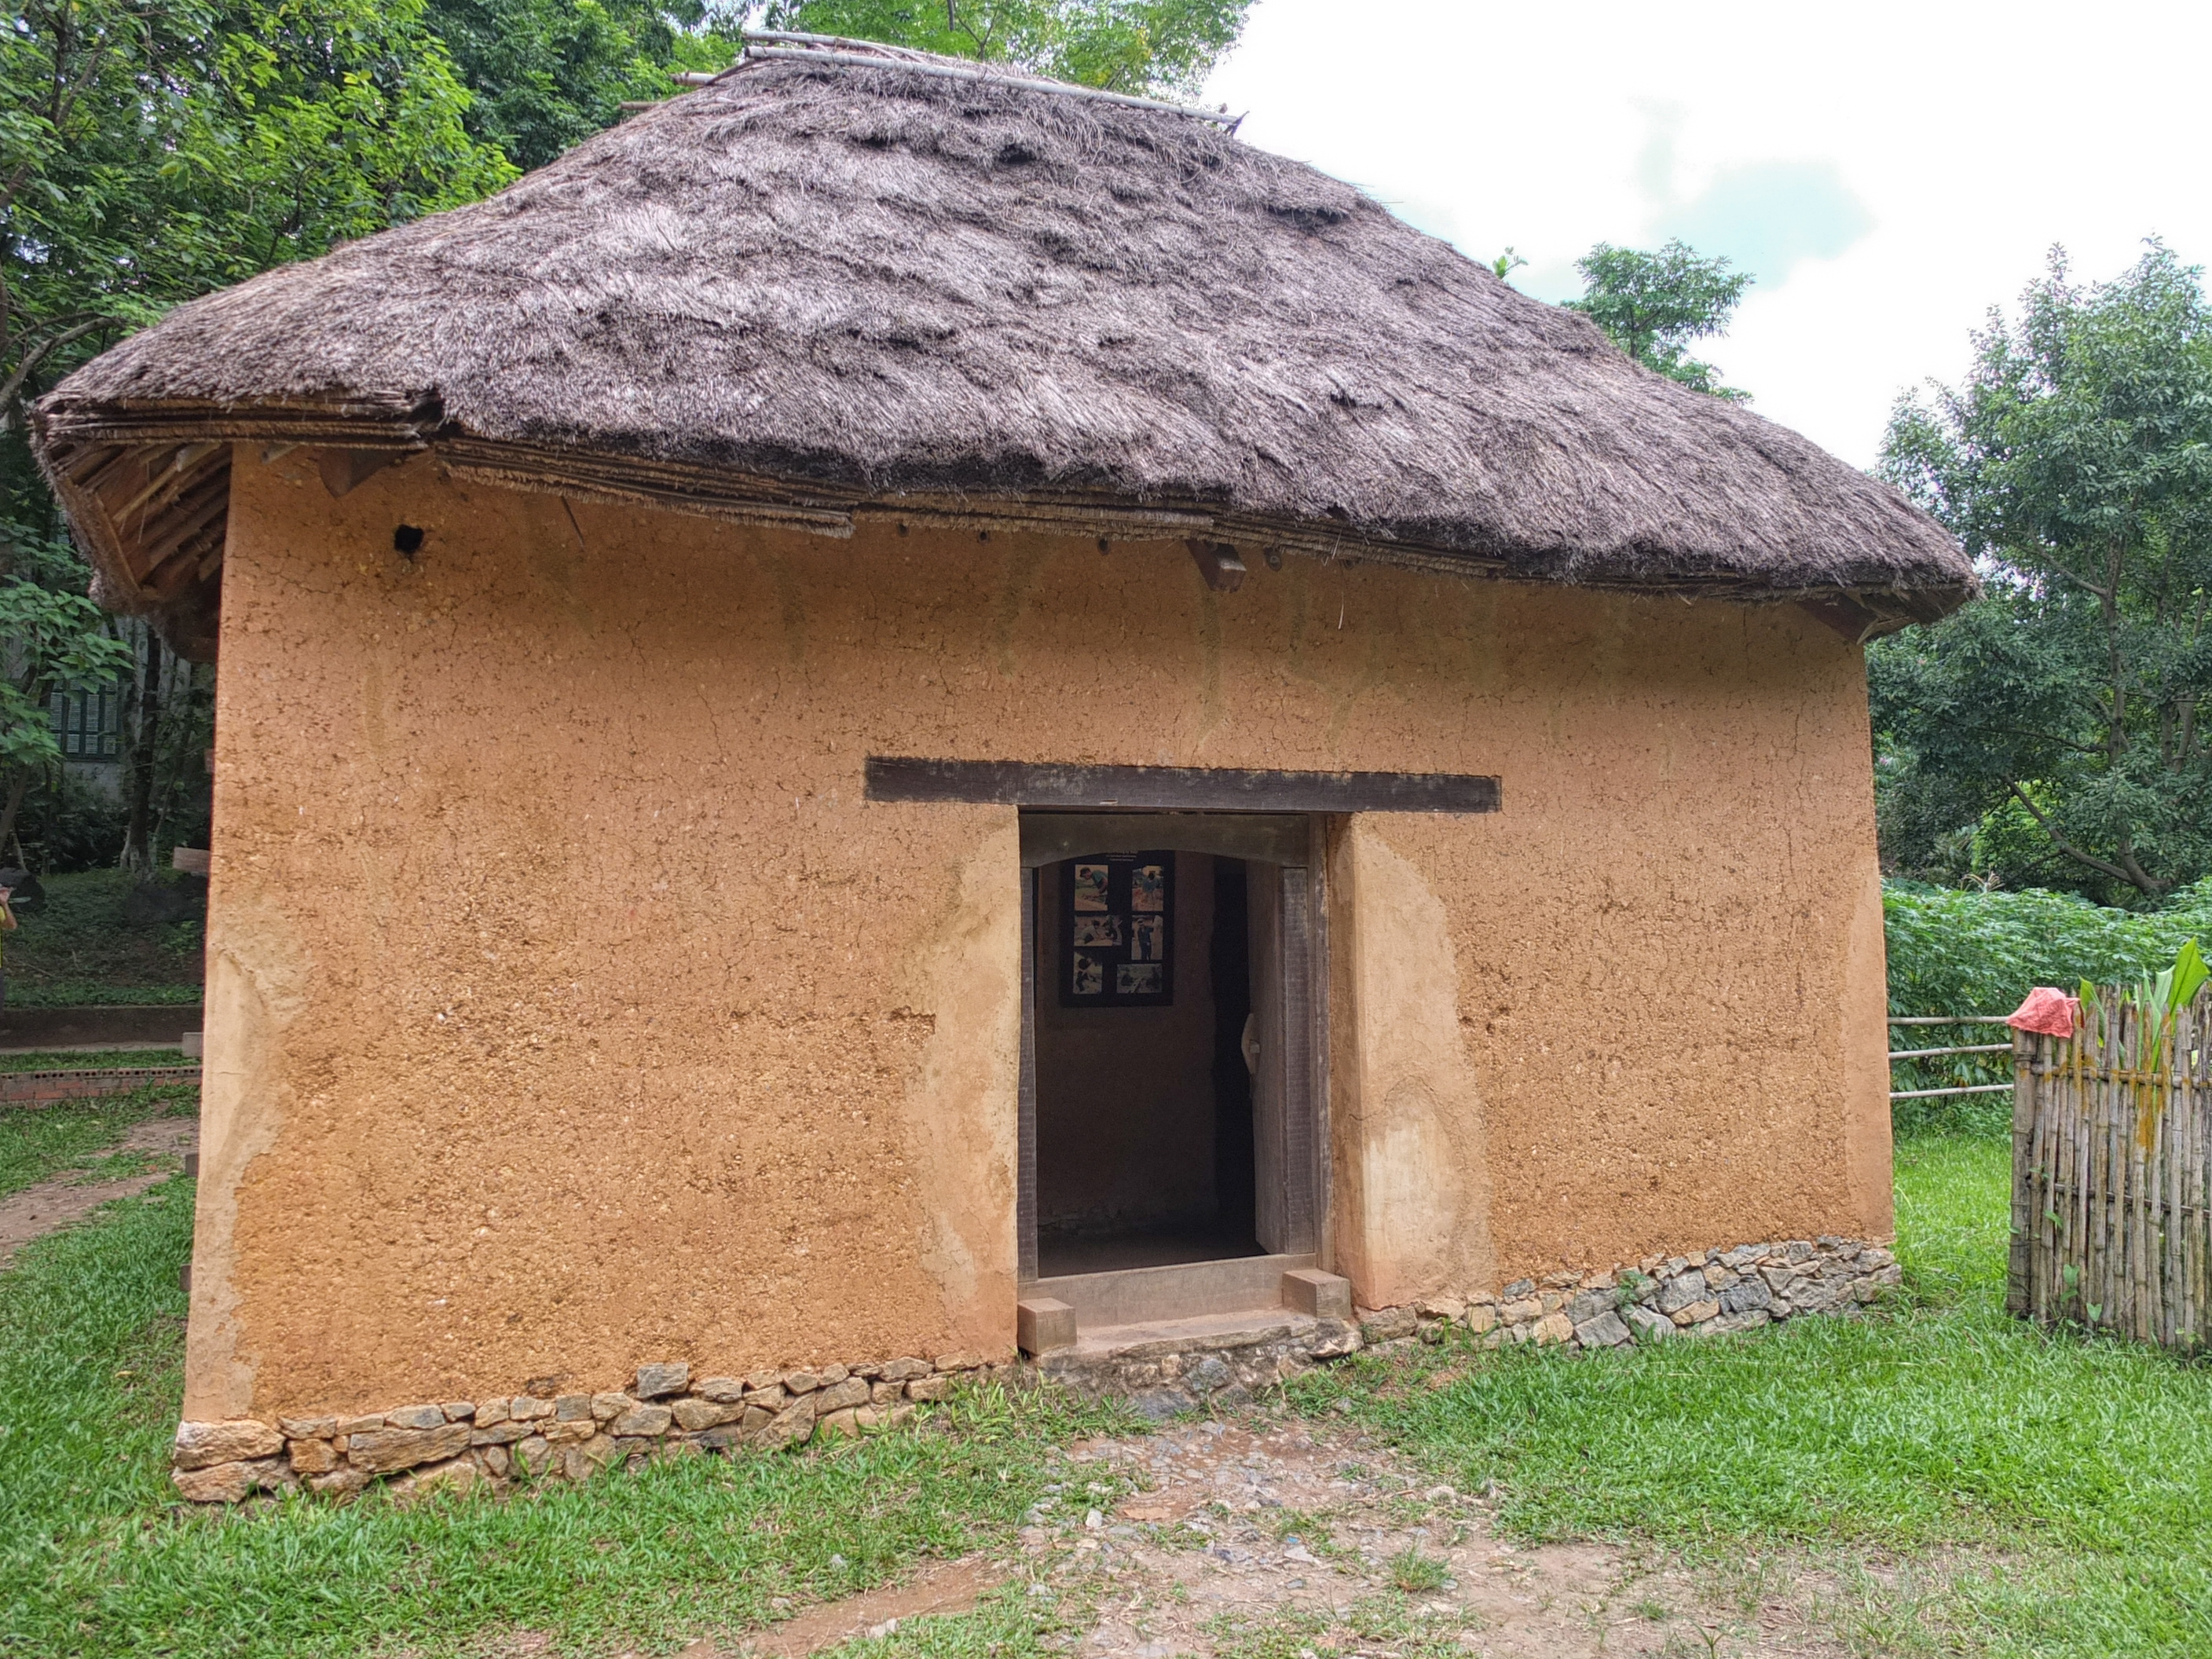 a small building with a straw roof